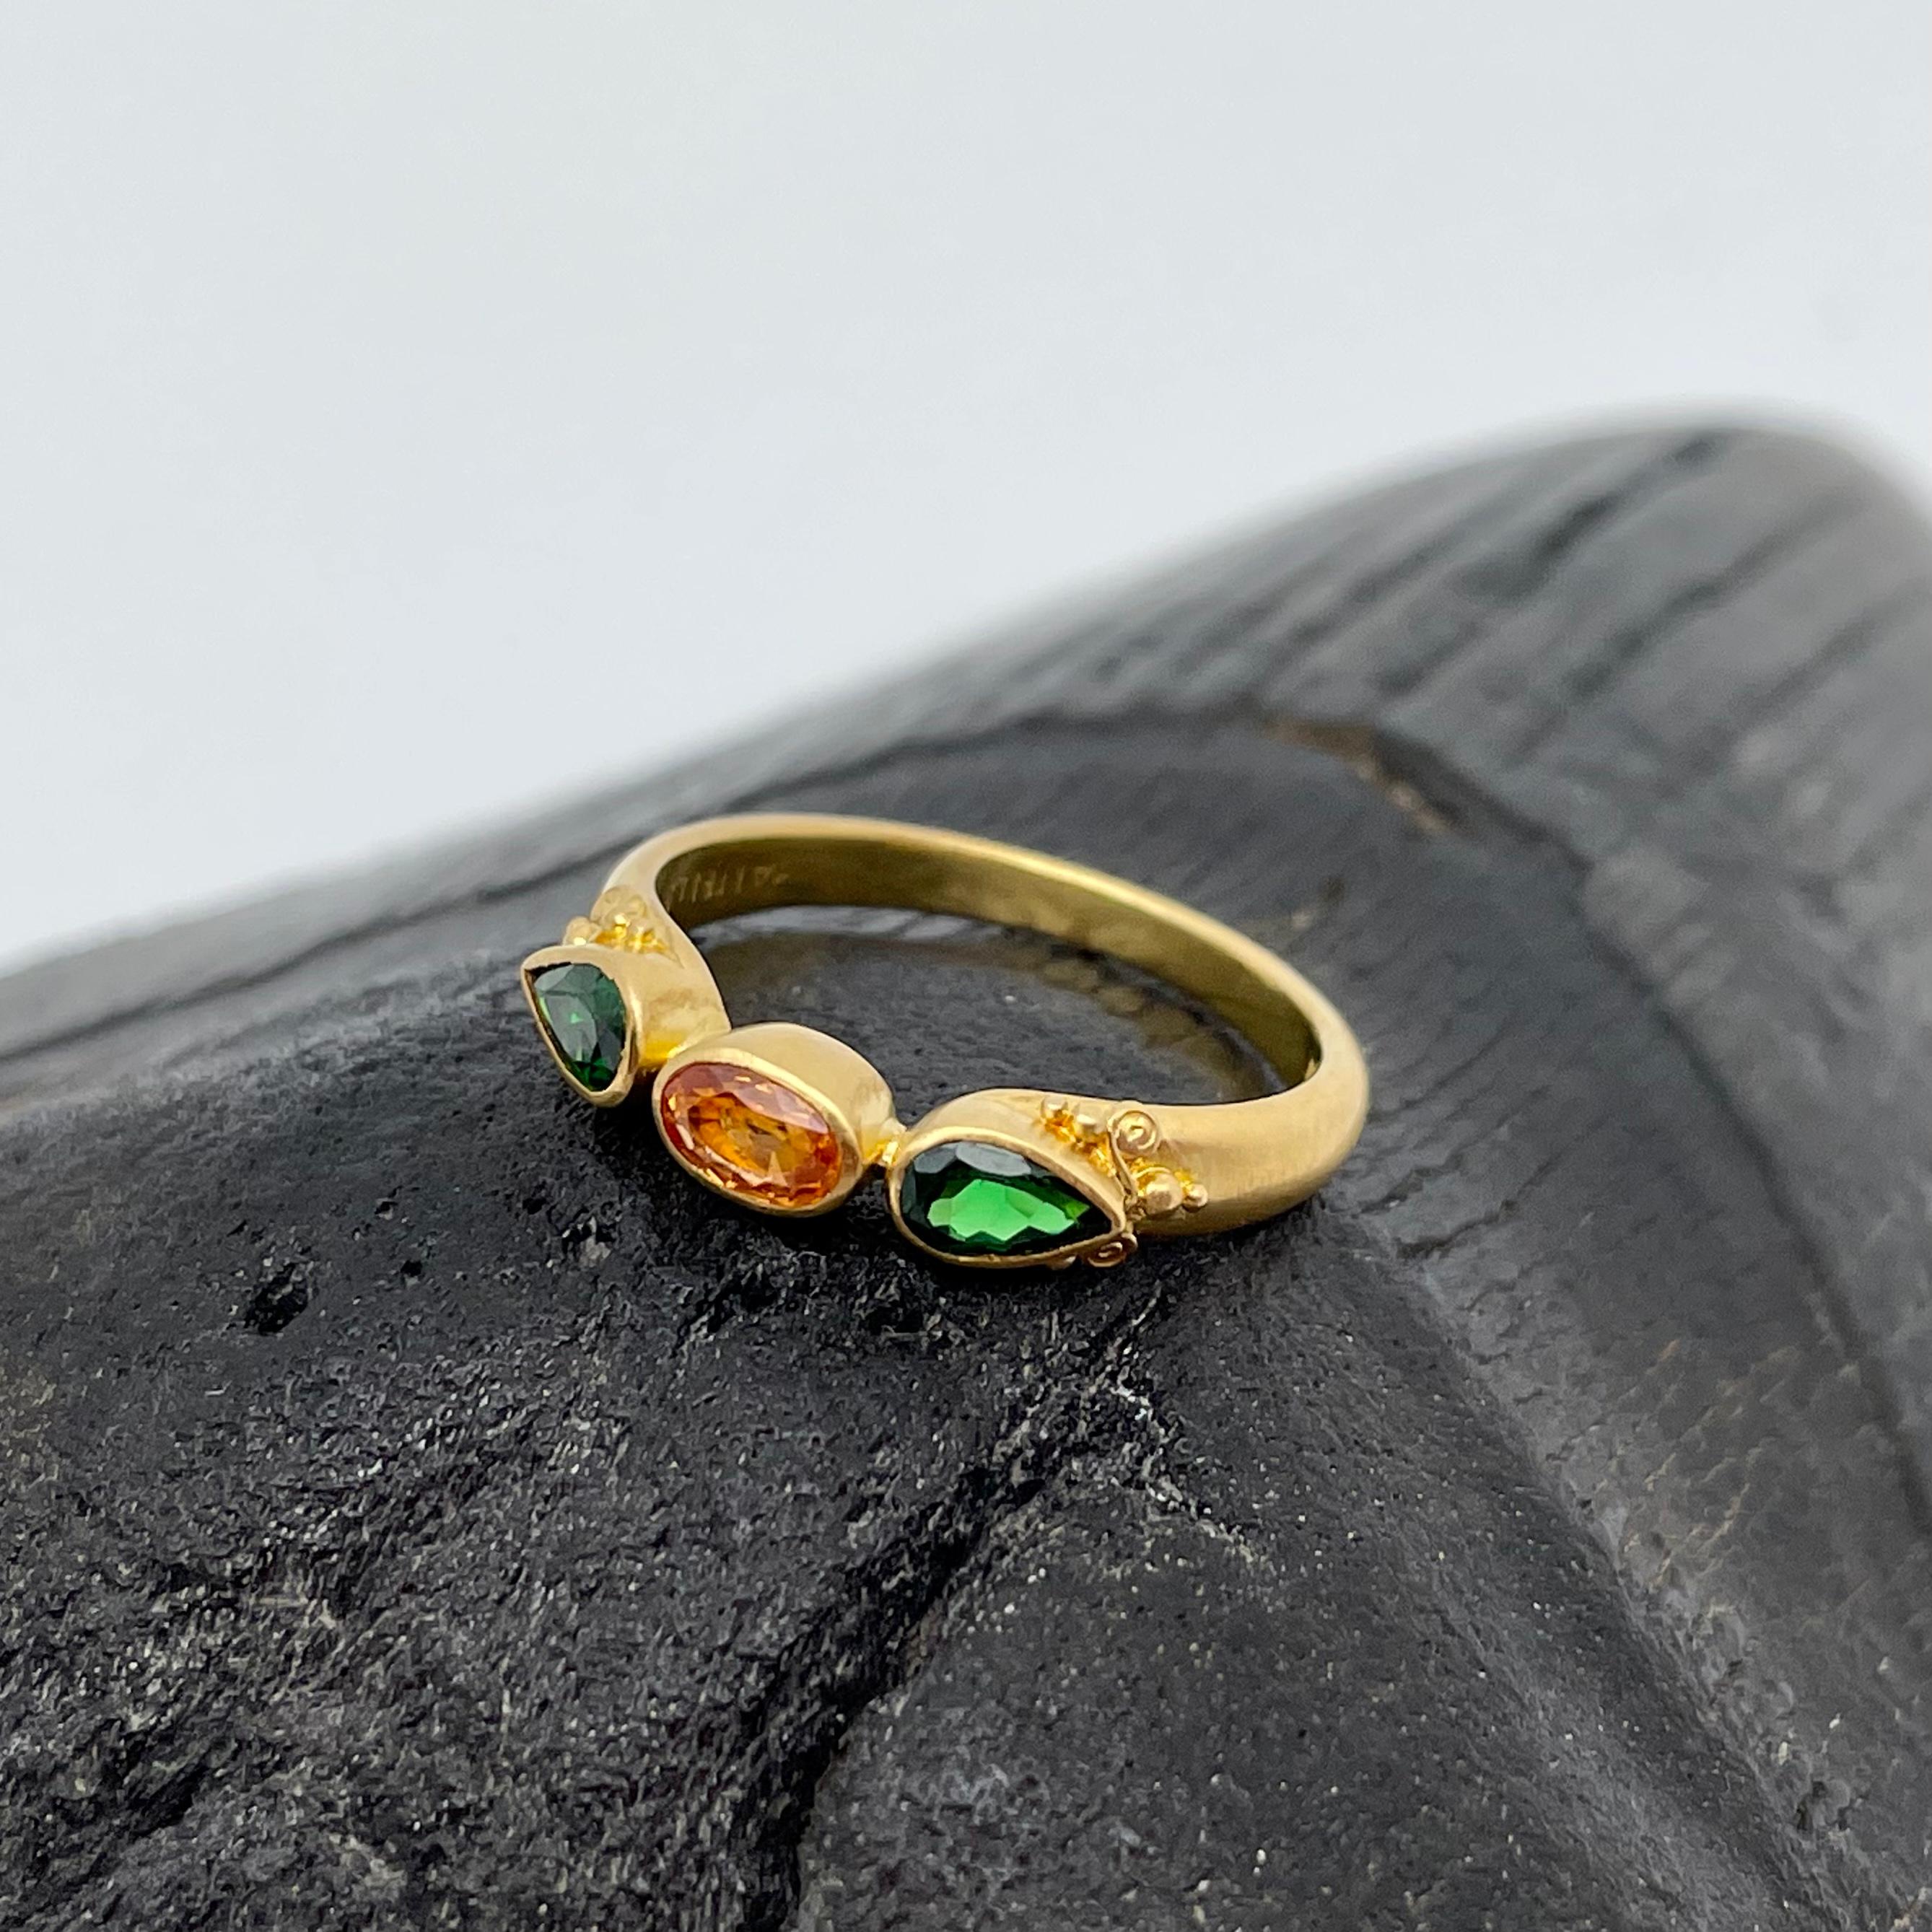 Two beautifully complementary colors of rare garnets: spessartite and tsavorite, make a nice combination in this handmade setting ornamented with small spirals and 